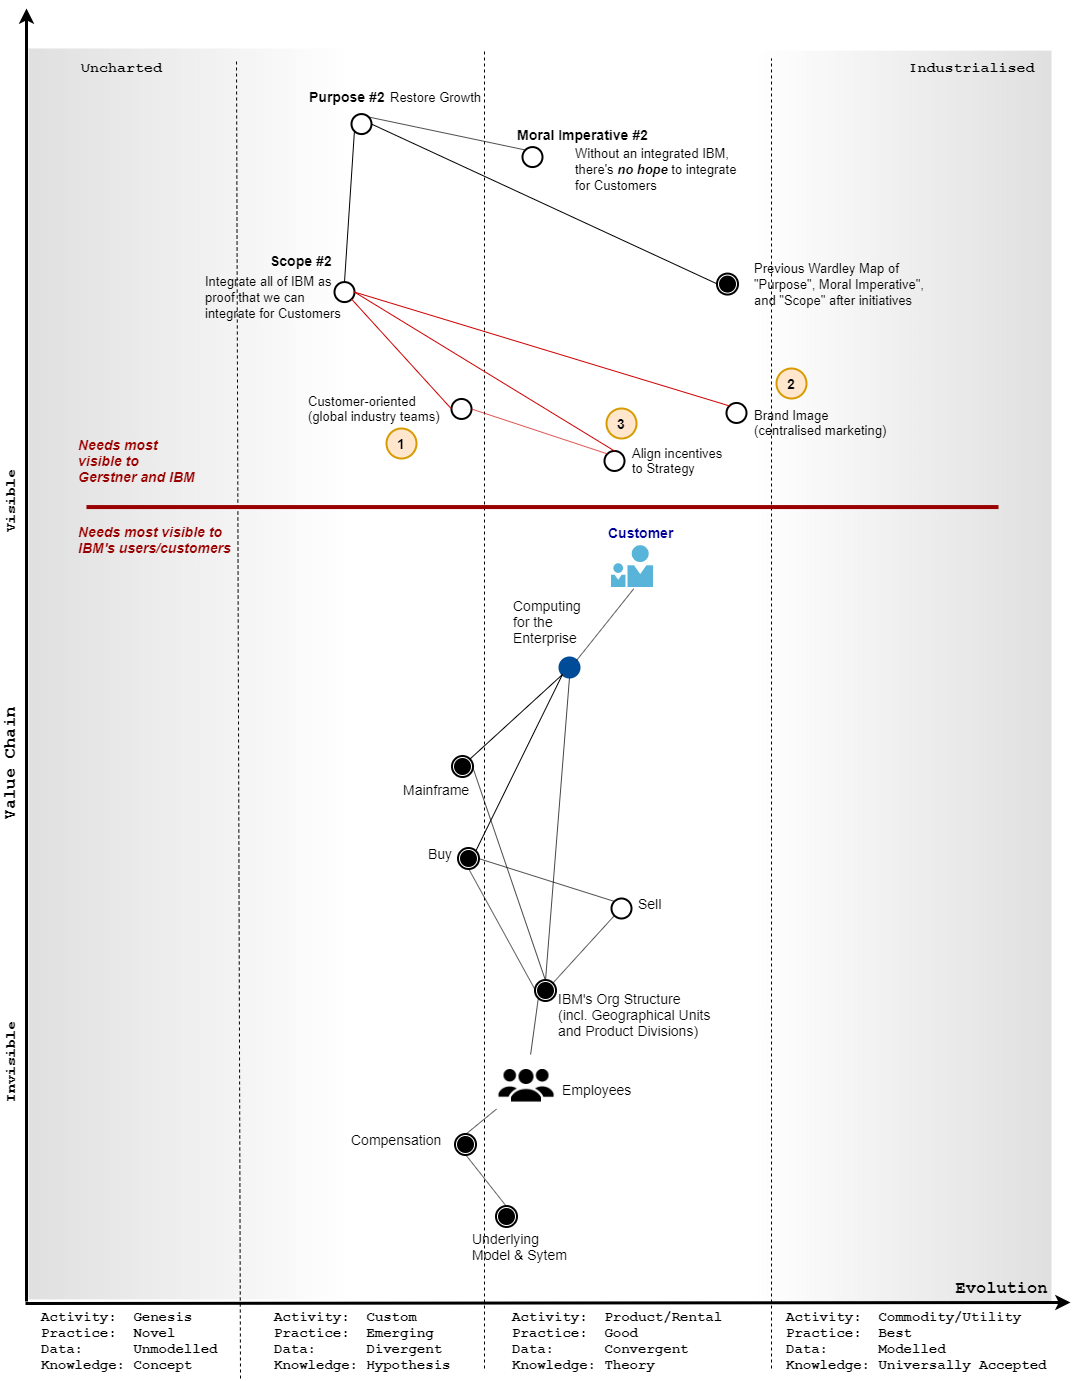 Map combining the decisions and the business functions.